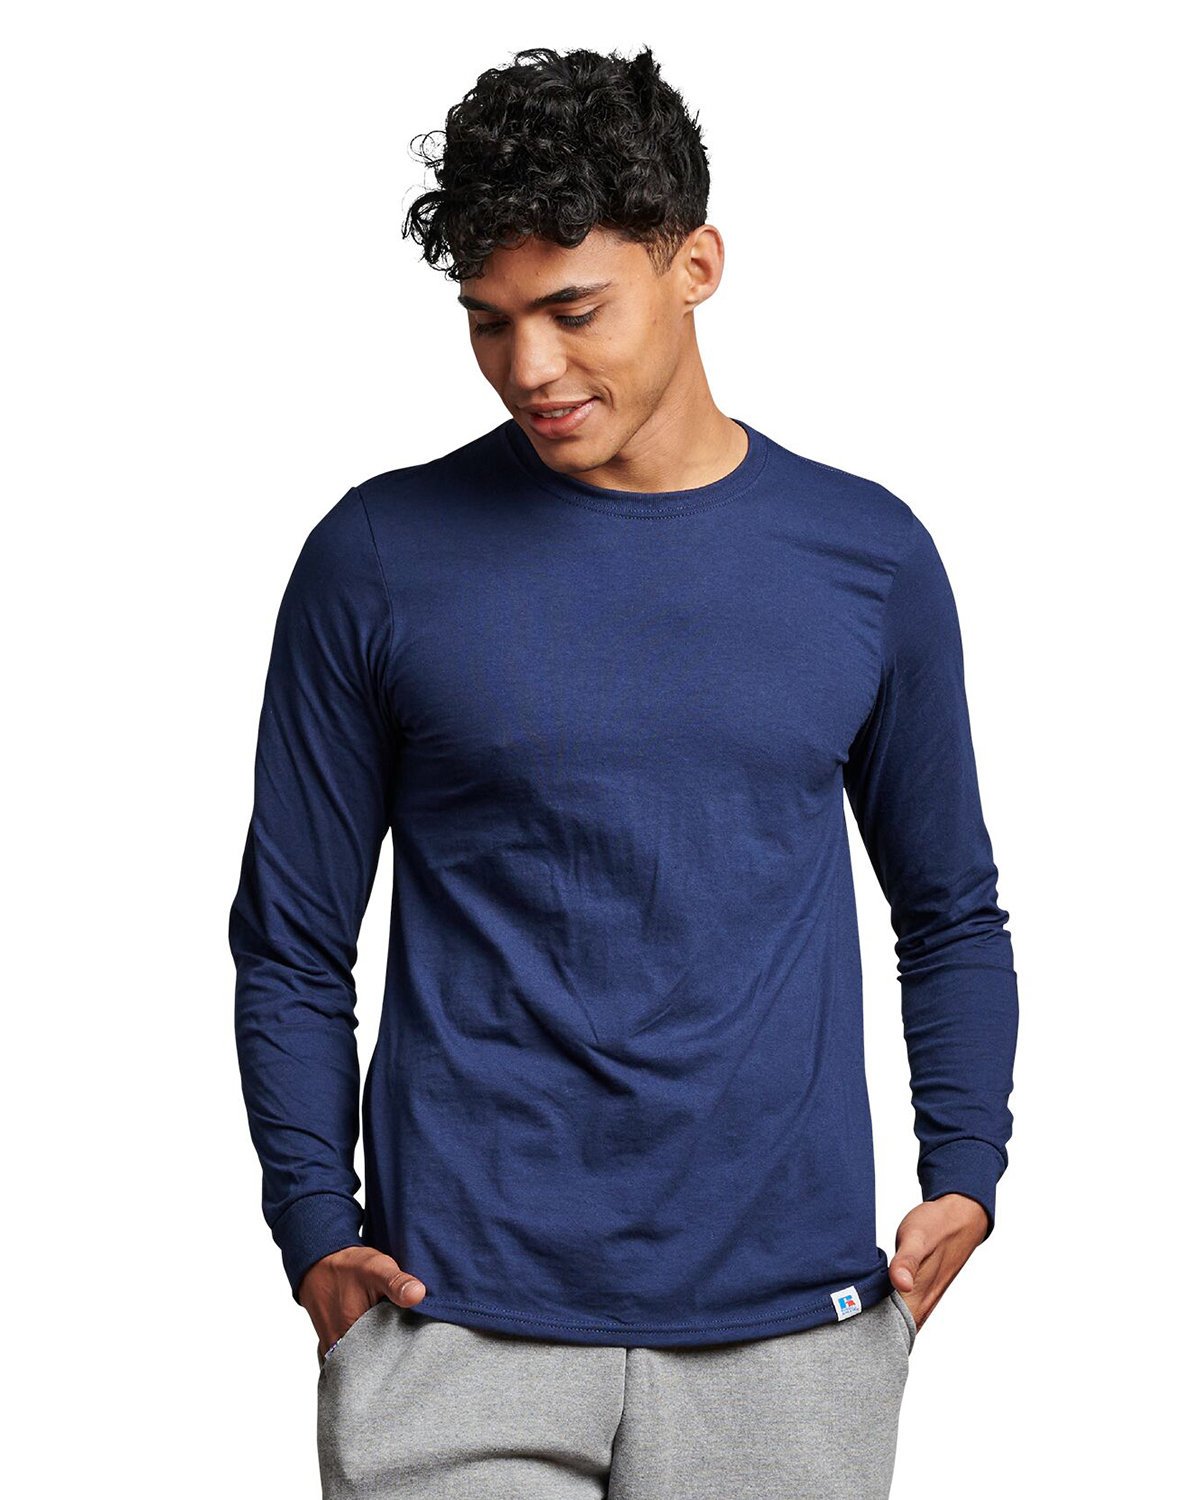 Russell Athletic Unisex Essential Performance Long-Sleeve T-Shirt NAVY 